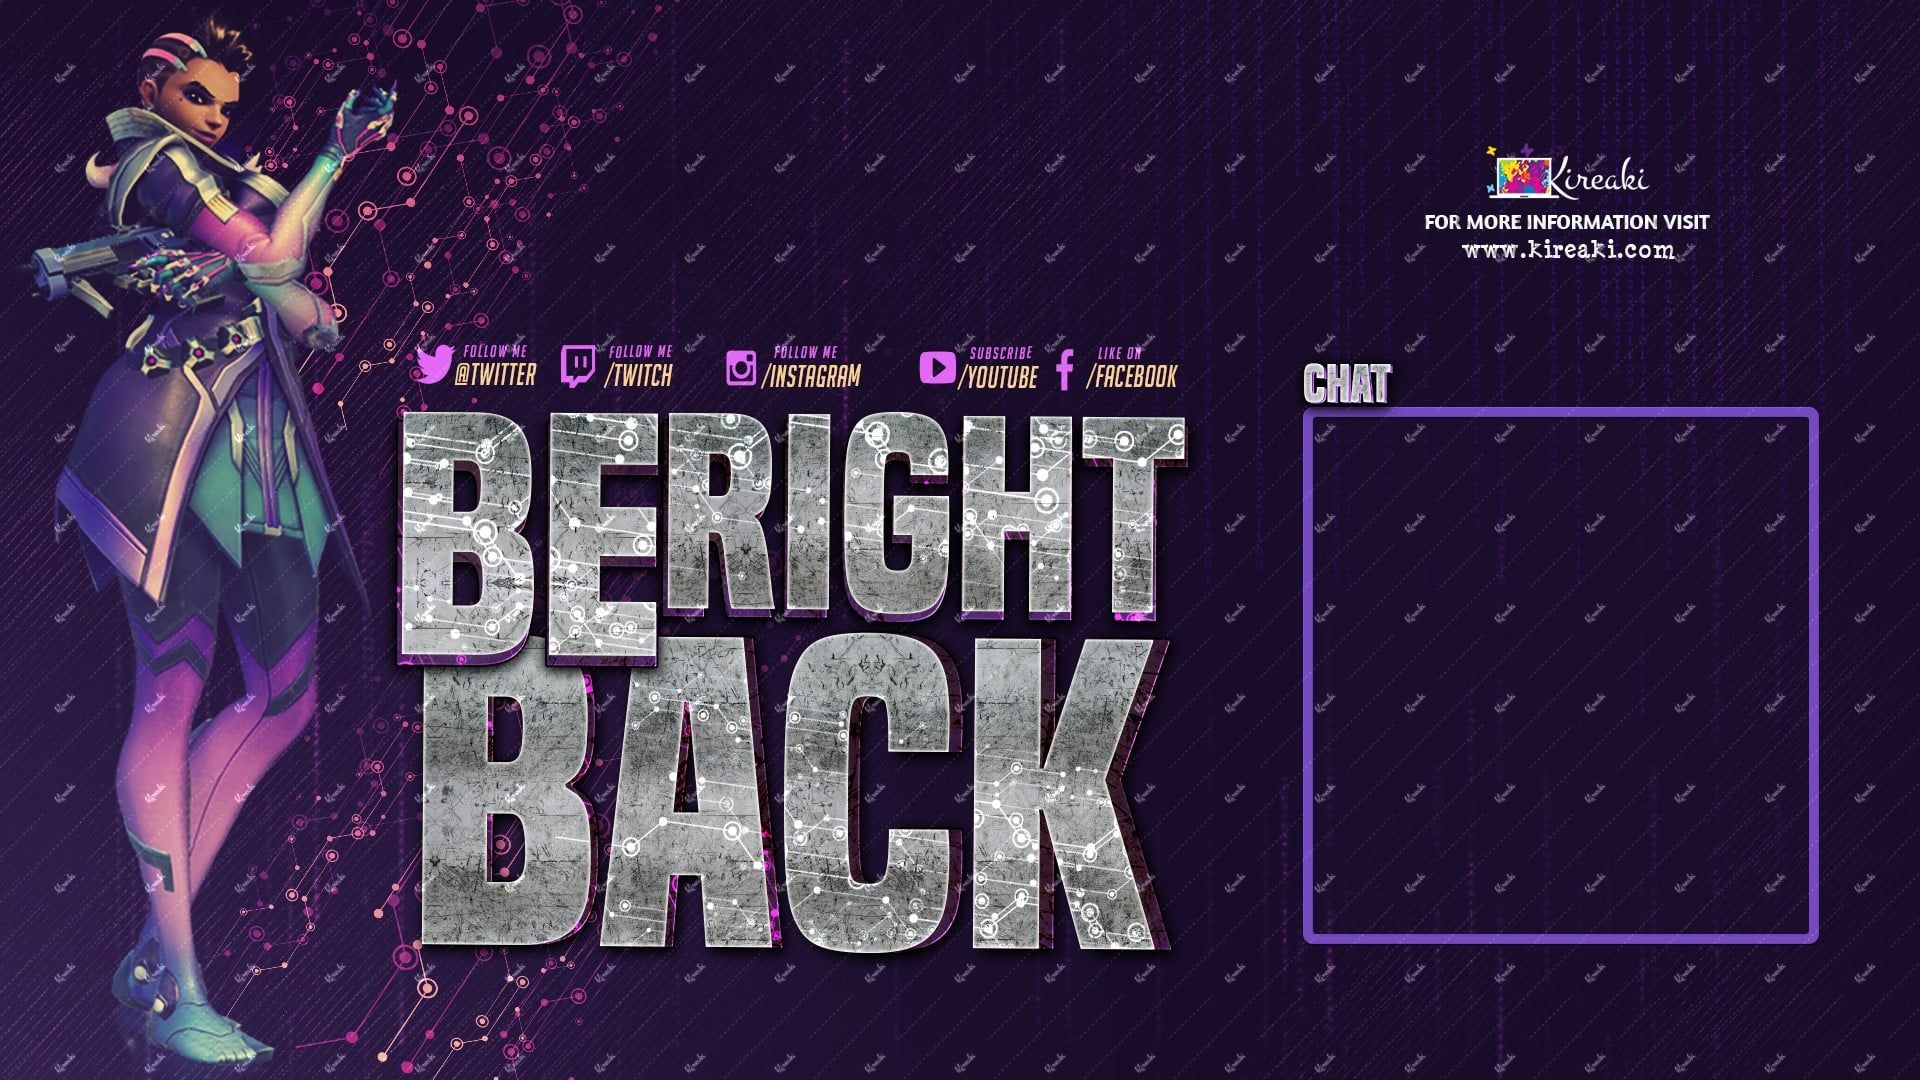 Be Right Back Image Wallpapers